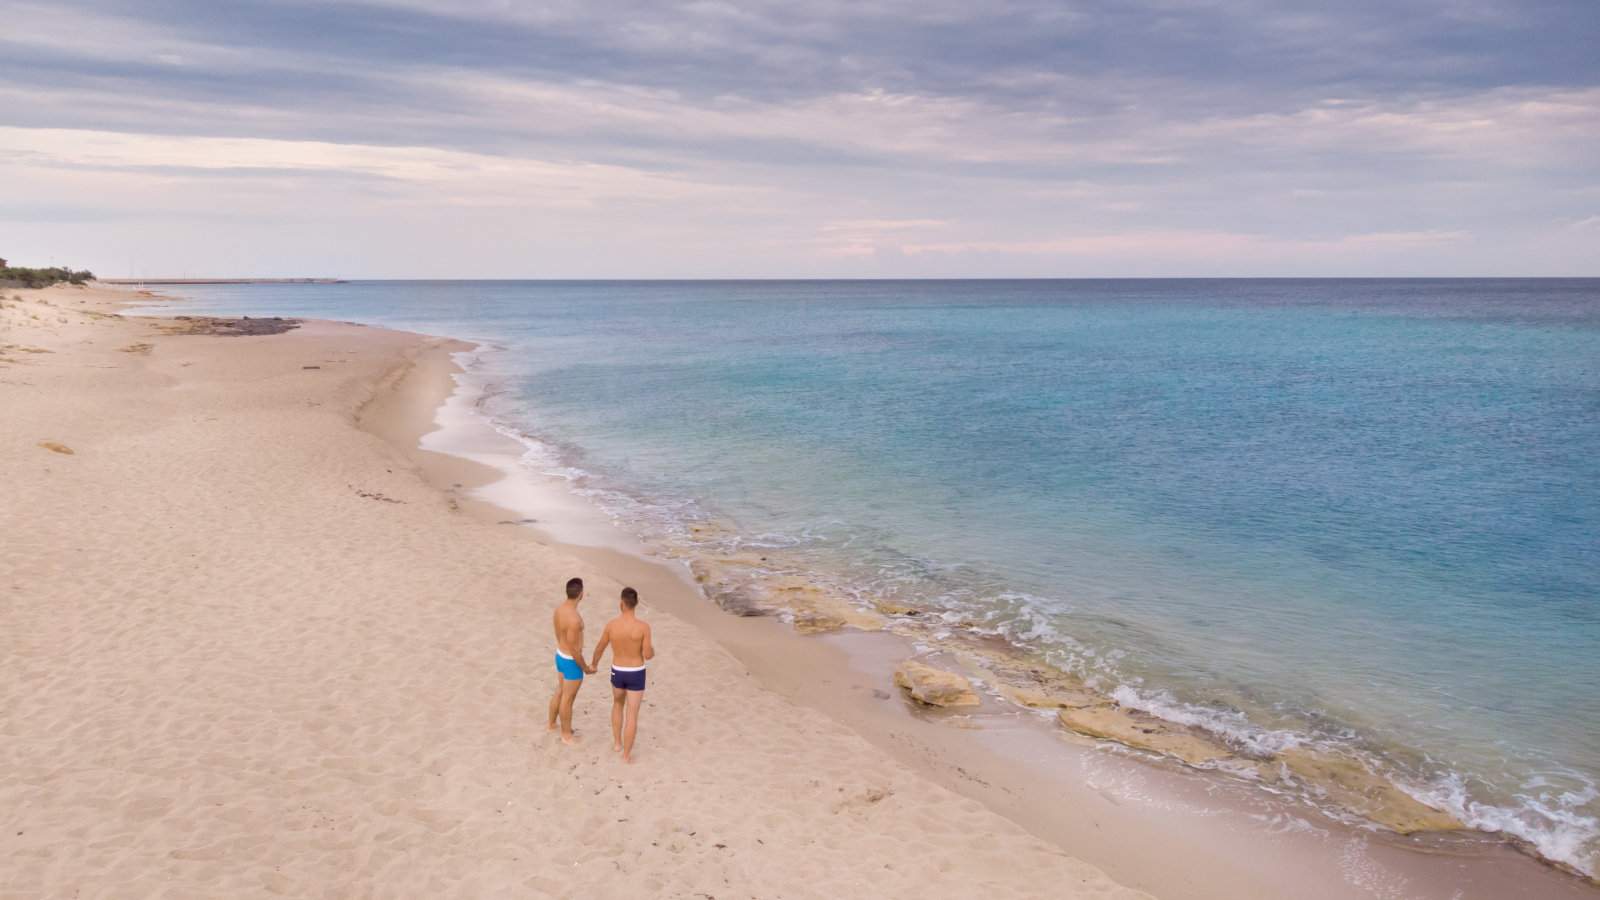 Puglia is home to many stunning beaches including plenty of gay ones